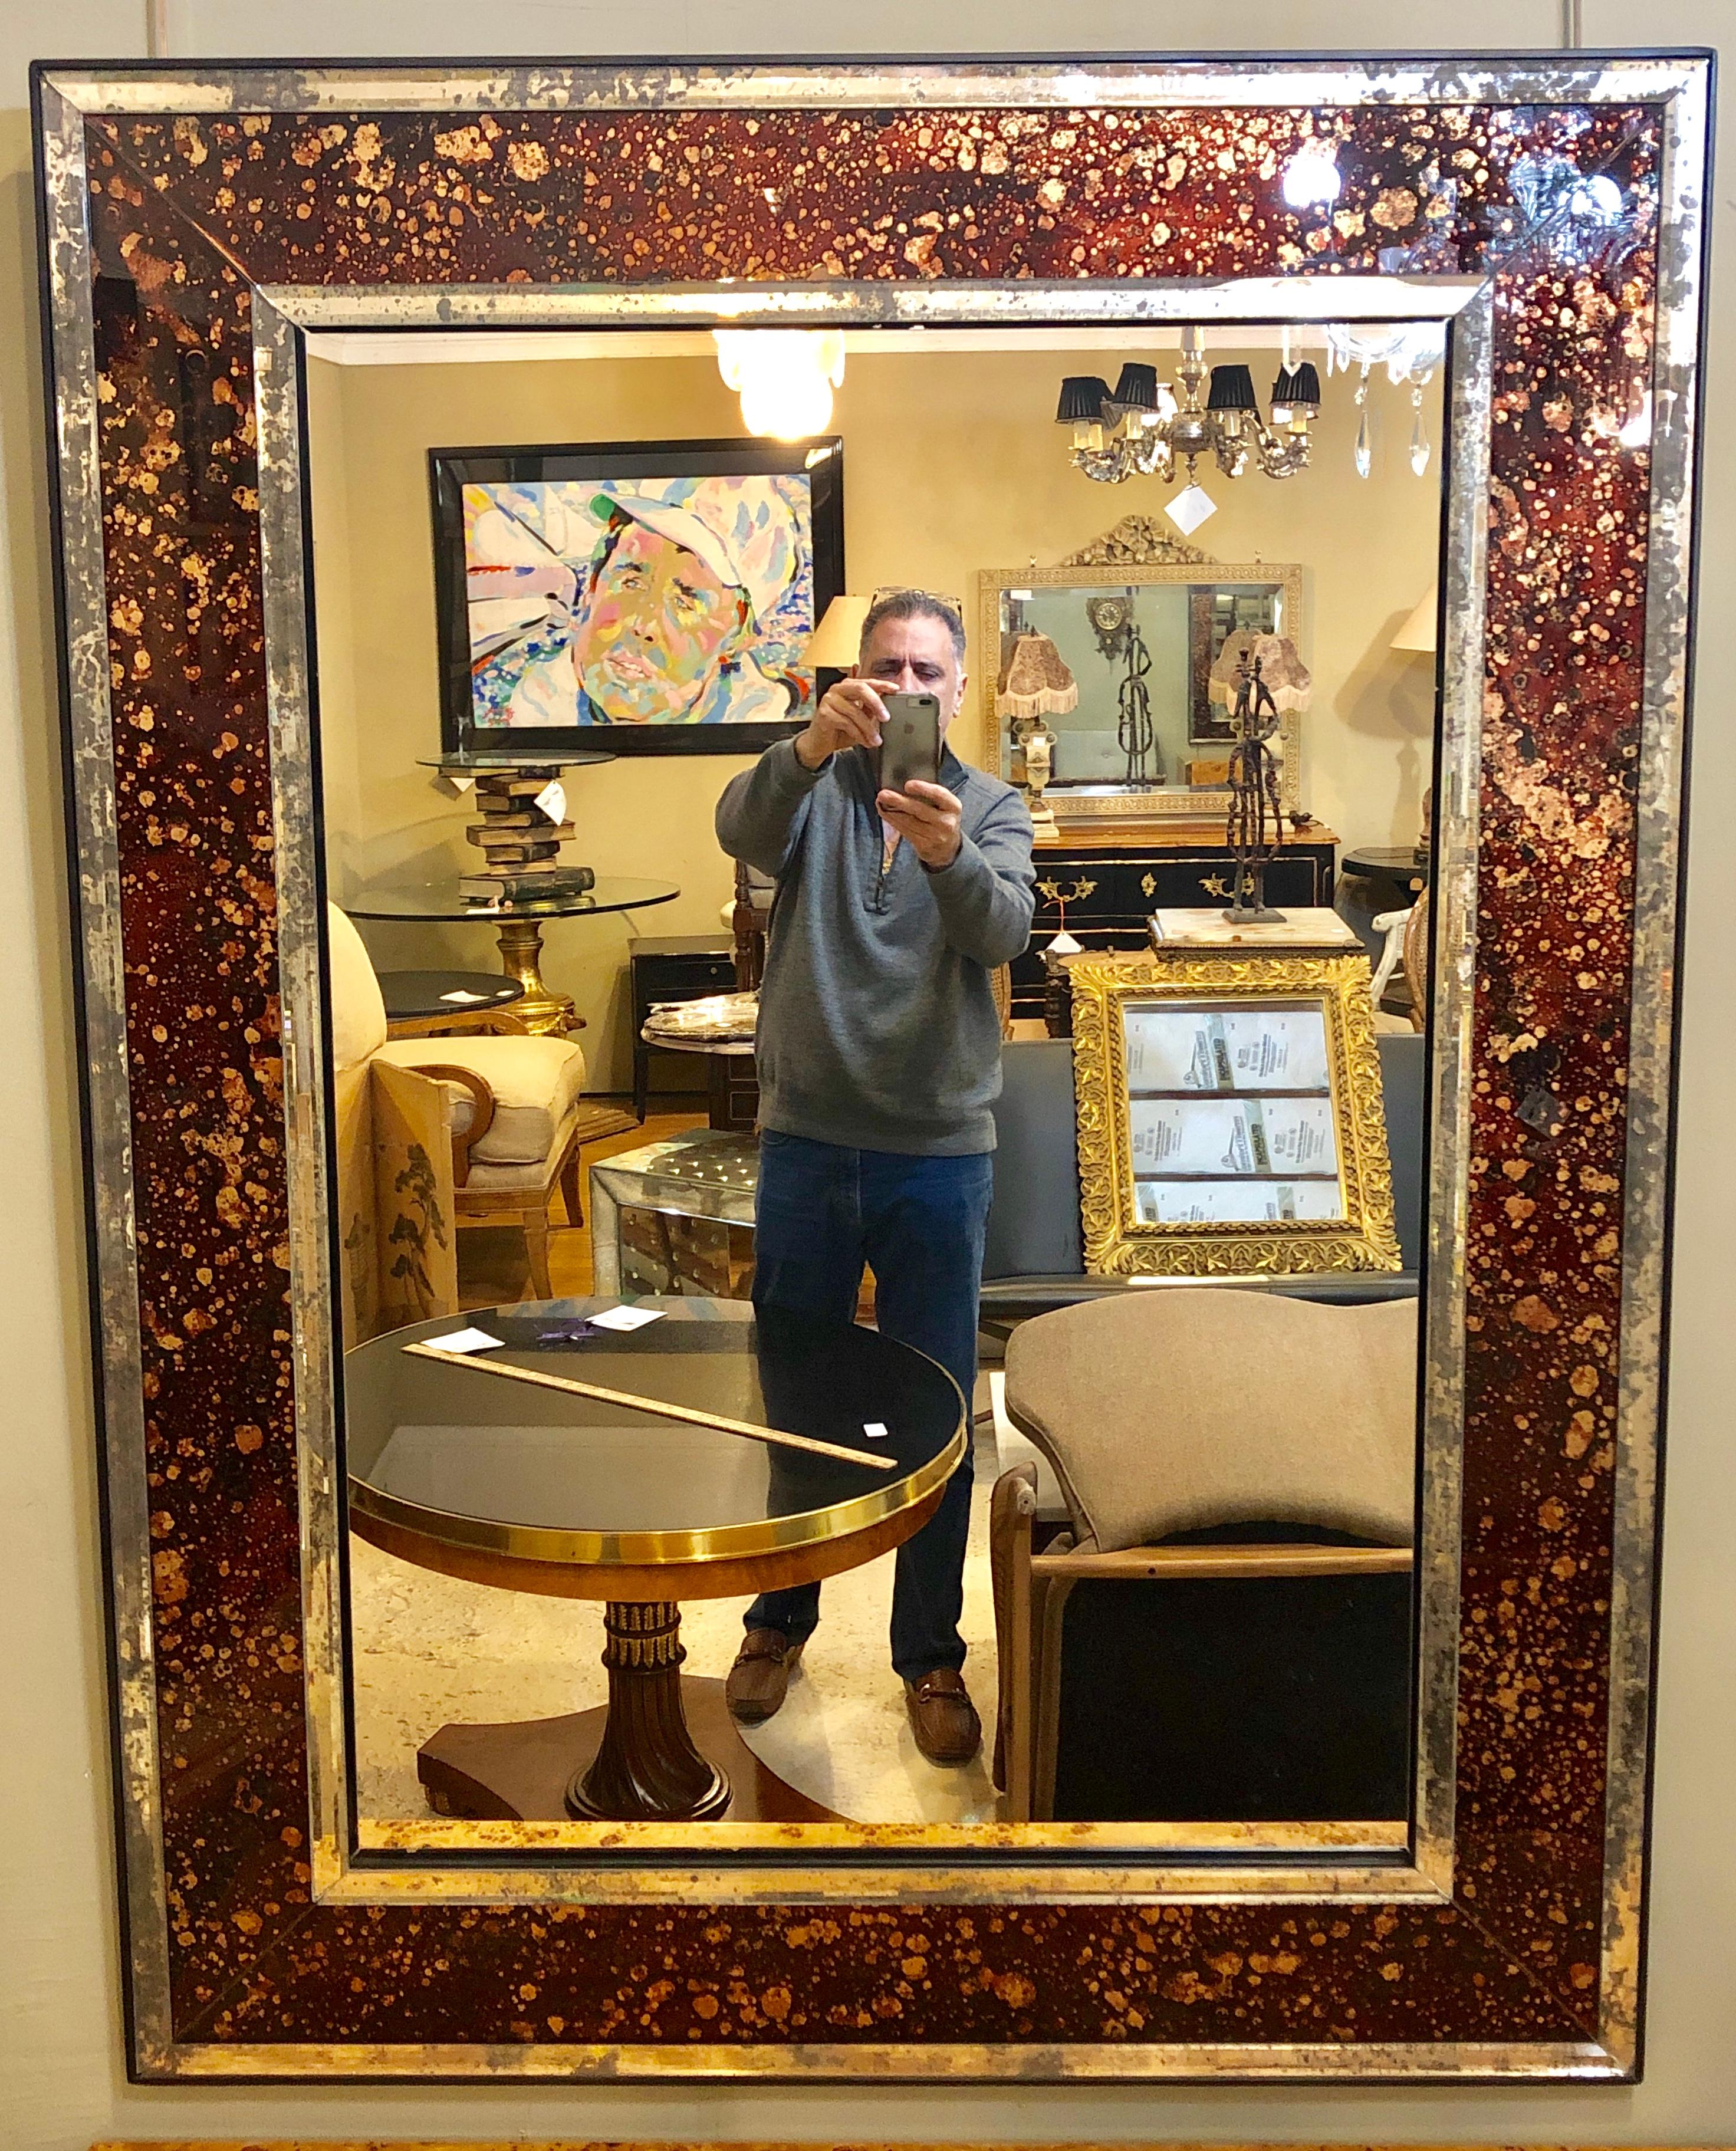 Finest Hollywood Regency pair of monumental tortoise shell beveled bordered console or wall mirrors. These spectacular wall or console mirrors have a clear center mirror with an antiqued beveled mirror frame flanking a finely etched tortoise shell